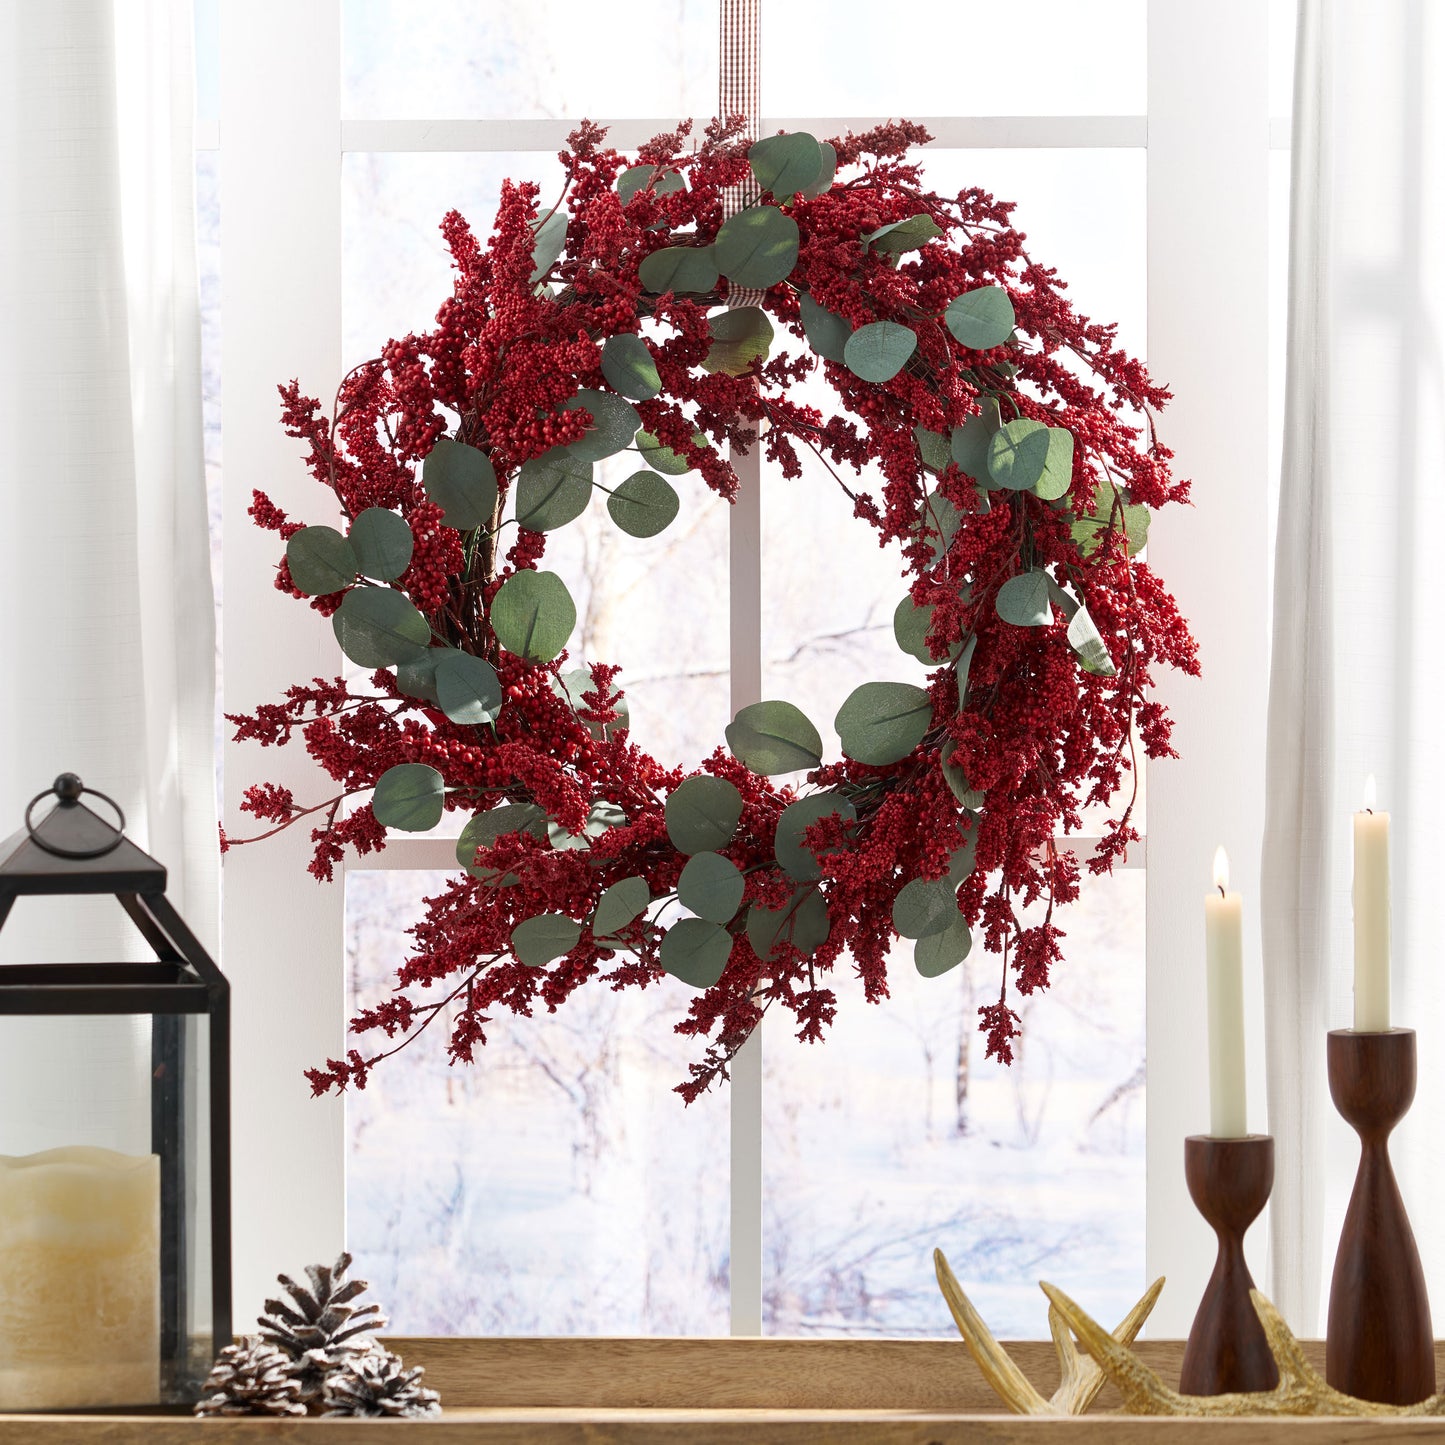 Sedlari 29" Eucalyptus Artificial Wreath with Berries, Green and Red